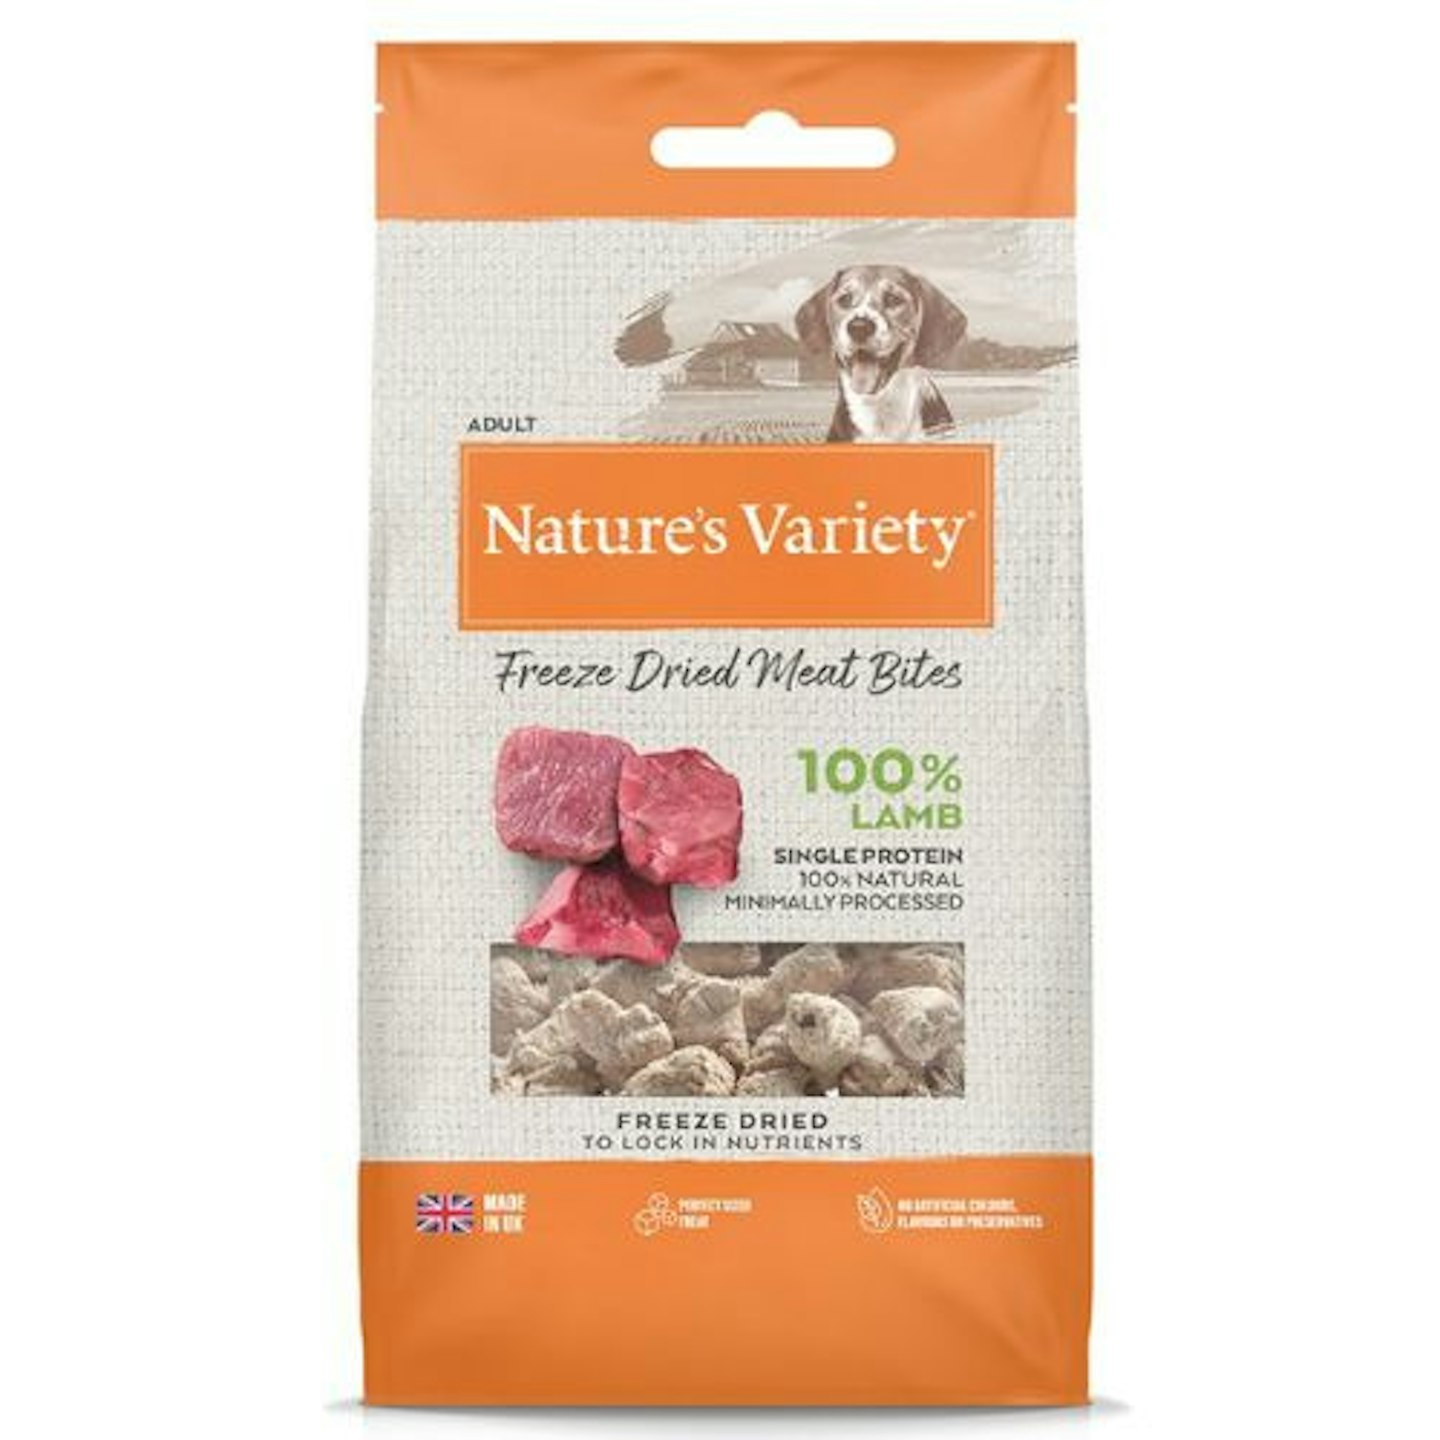 Nature's Variety Freeze Dried Meat Bites Topper